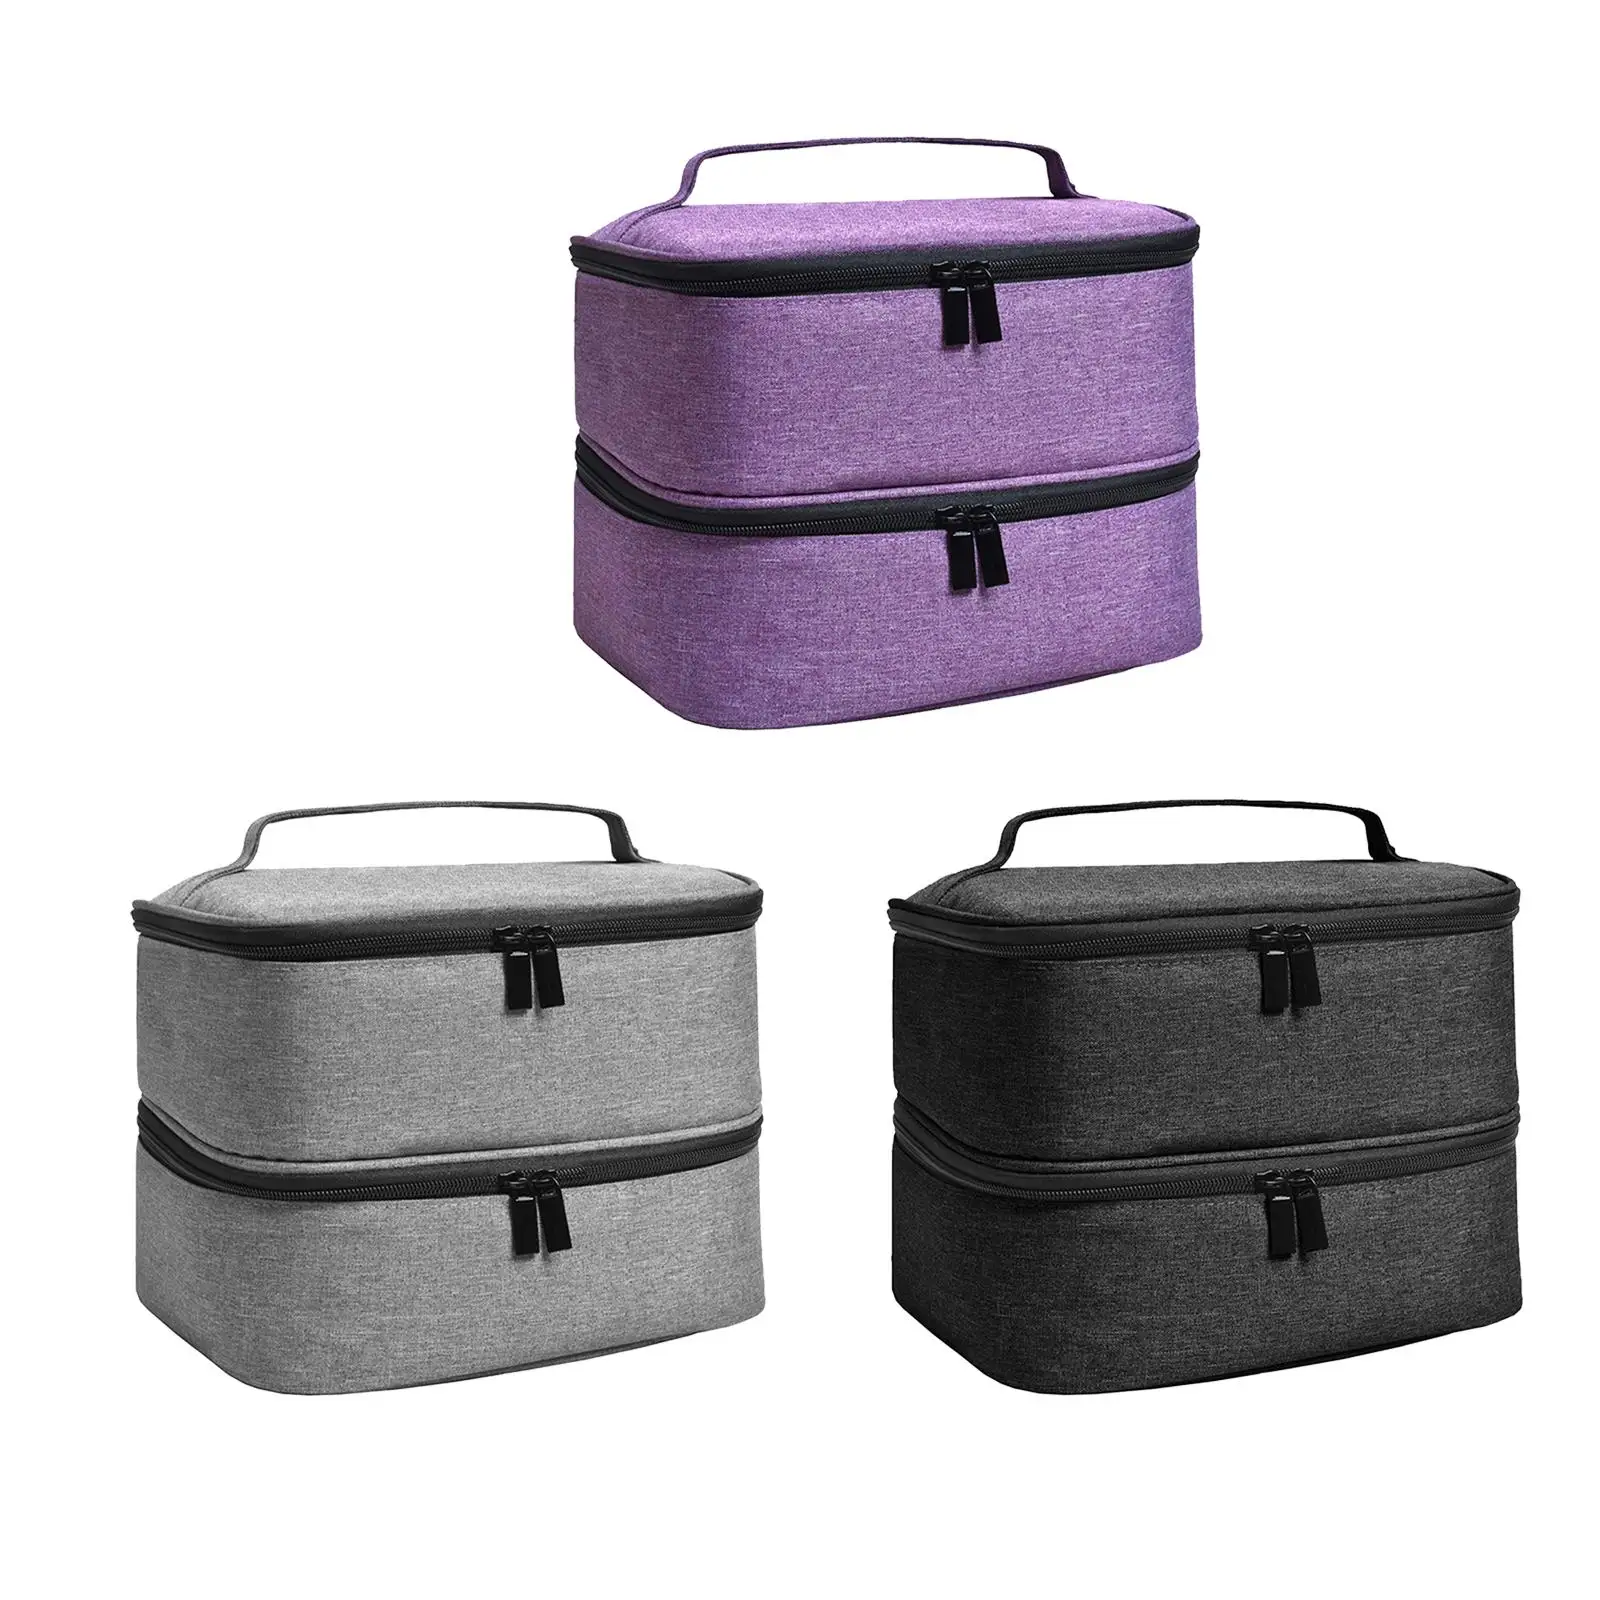 Oxford Cloth Double Layer Nail Polish Storage Bag Handbag with Sturdy Zippers for Manicure Sets Travel Storage Box Cosmetic Bag